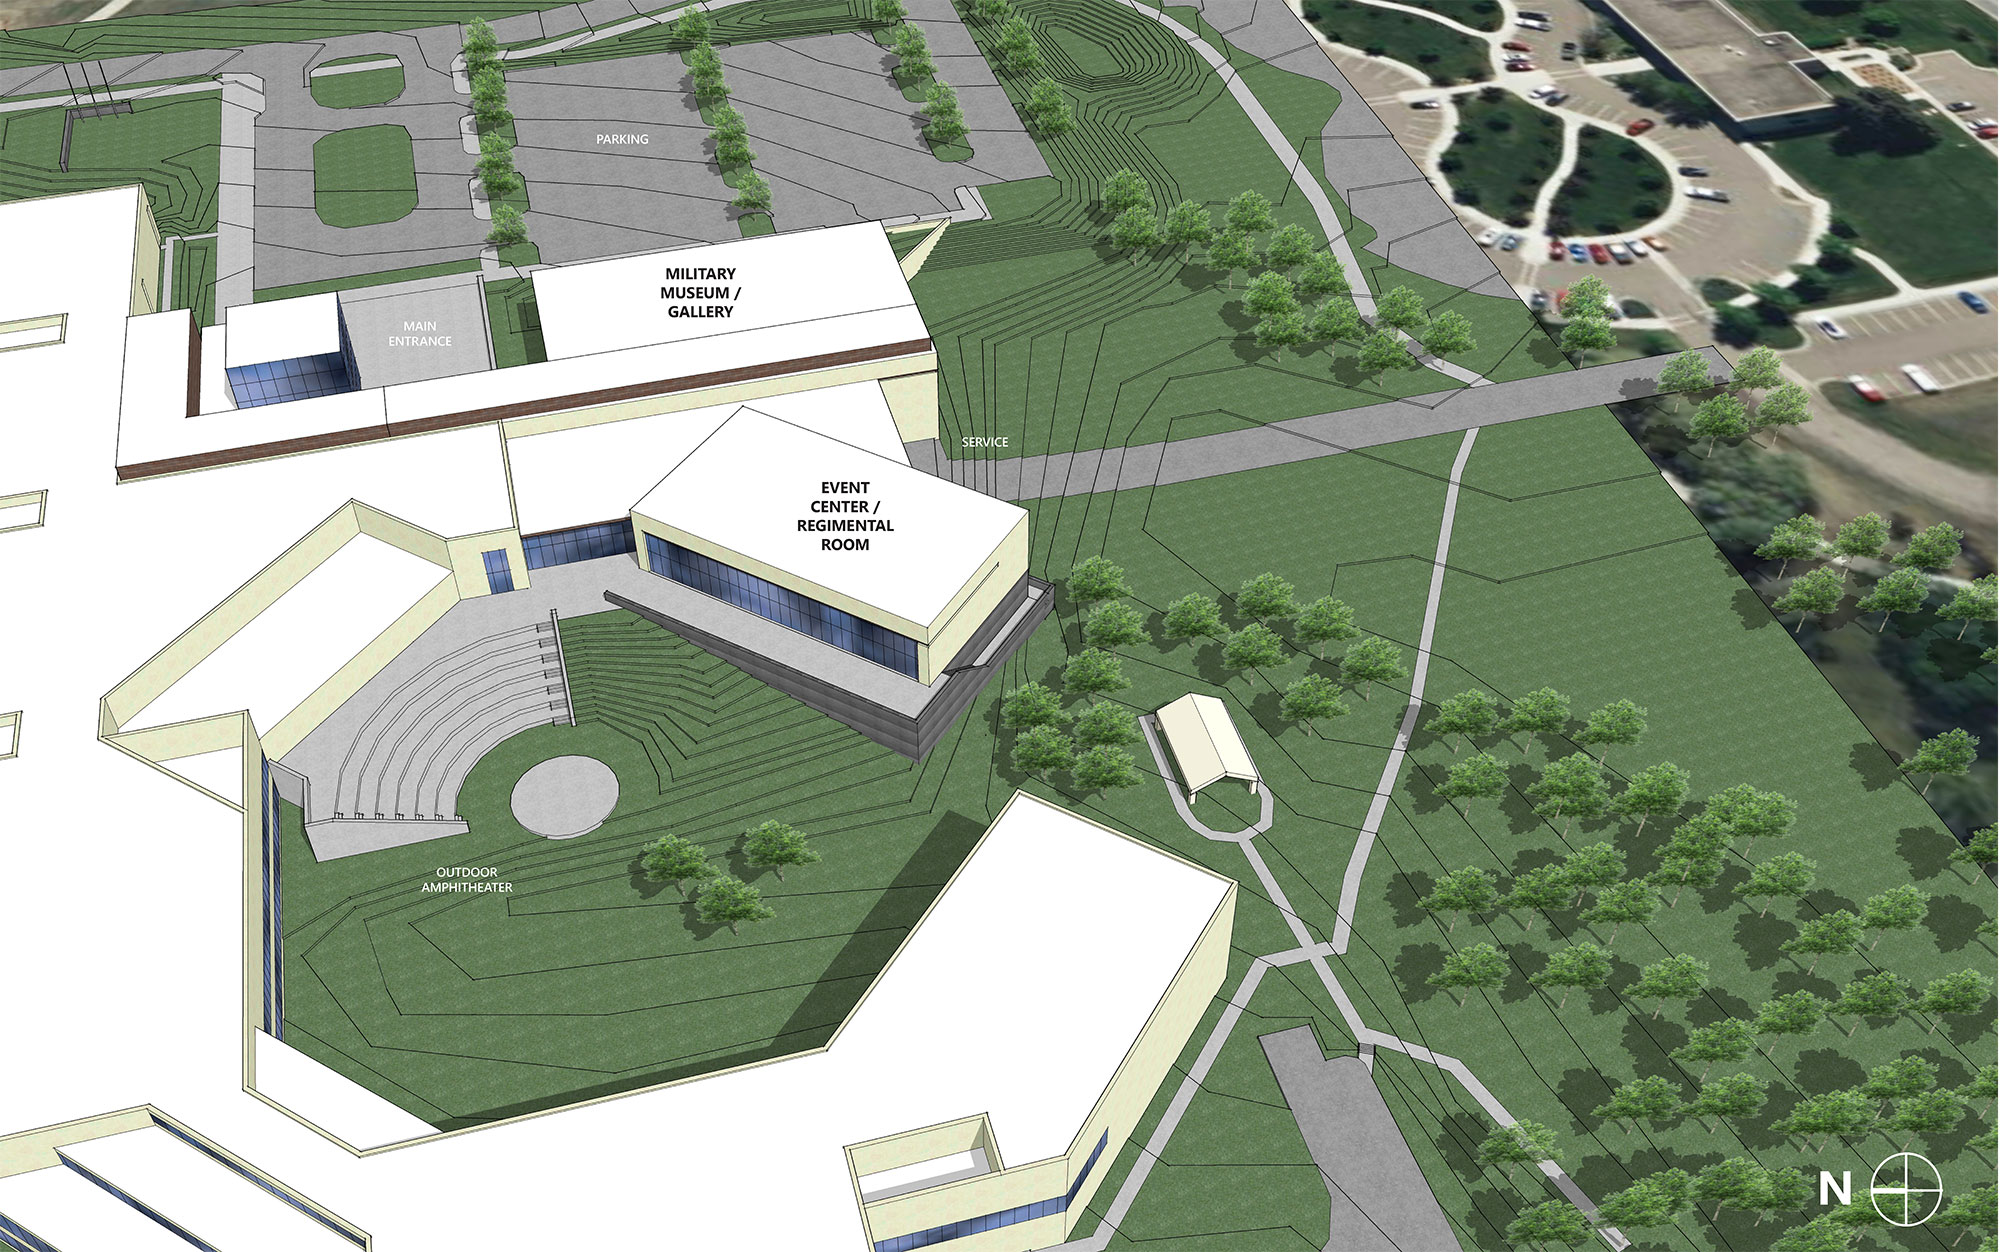 3D rendering of proposed military gallery expansion on the south end of the current ND Heritage Center & State Museum